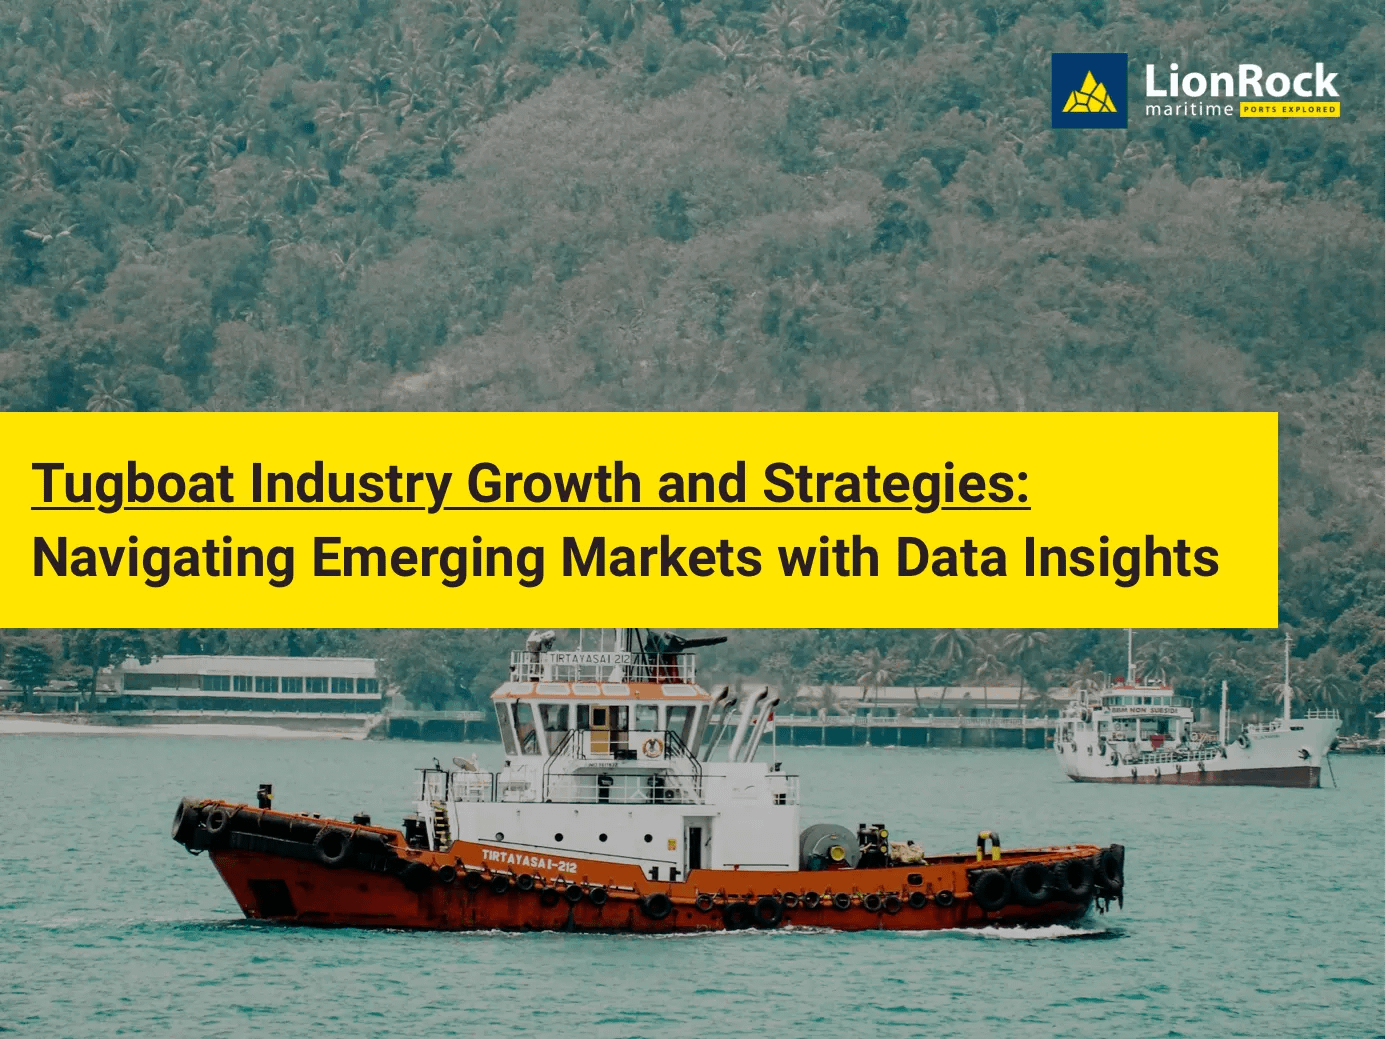 Tugboat Industry Growth and Strategies: Navigating Emerging Markets with Data Insights